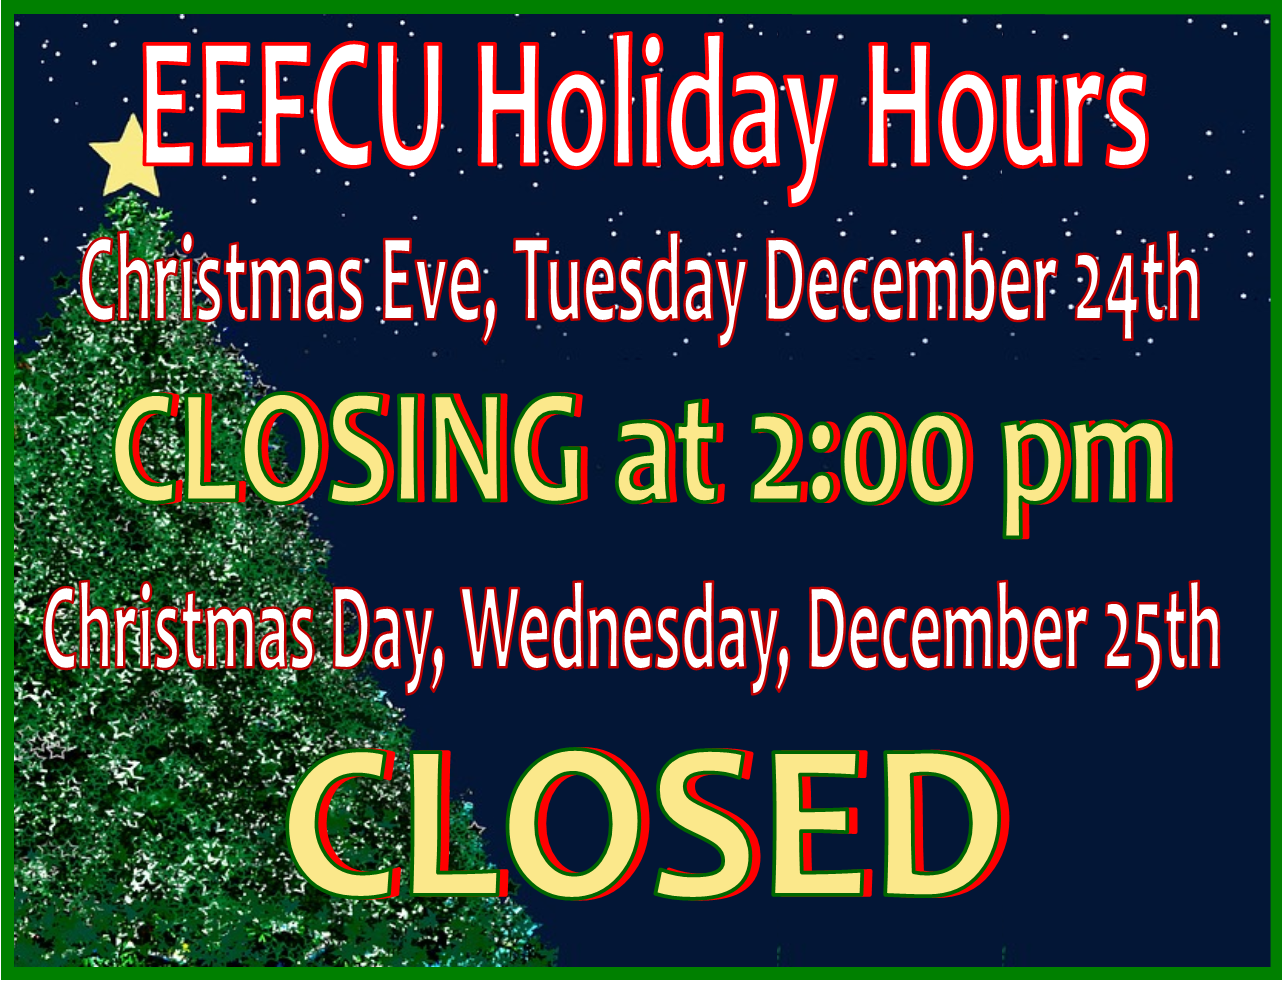 The Eefcu Is Closing Early Today And Closed Tomorrow Emerald Empire Federal Credit Union